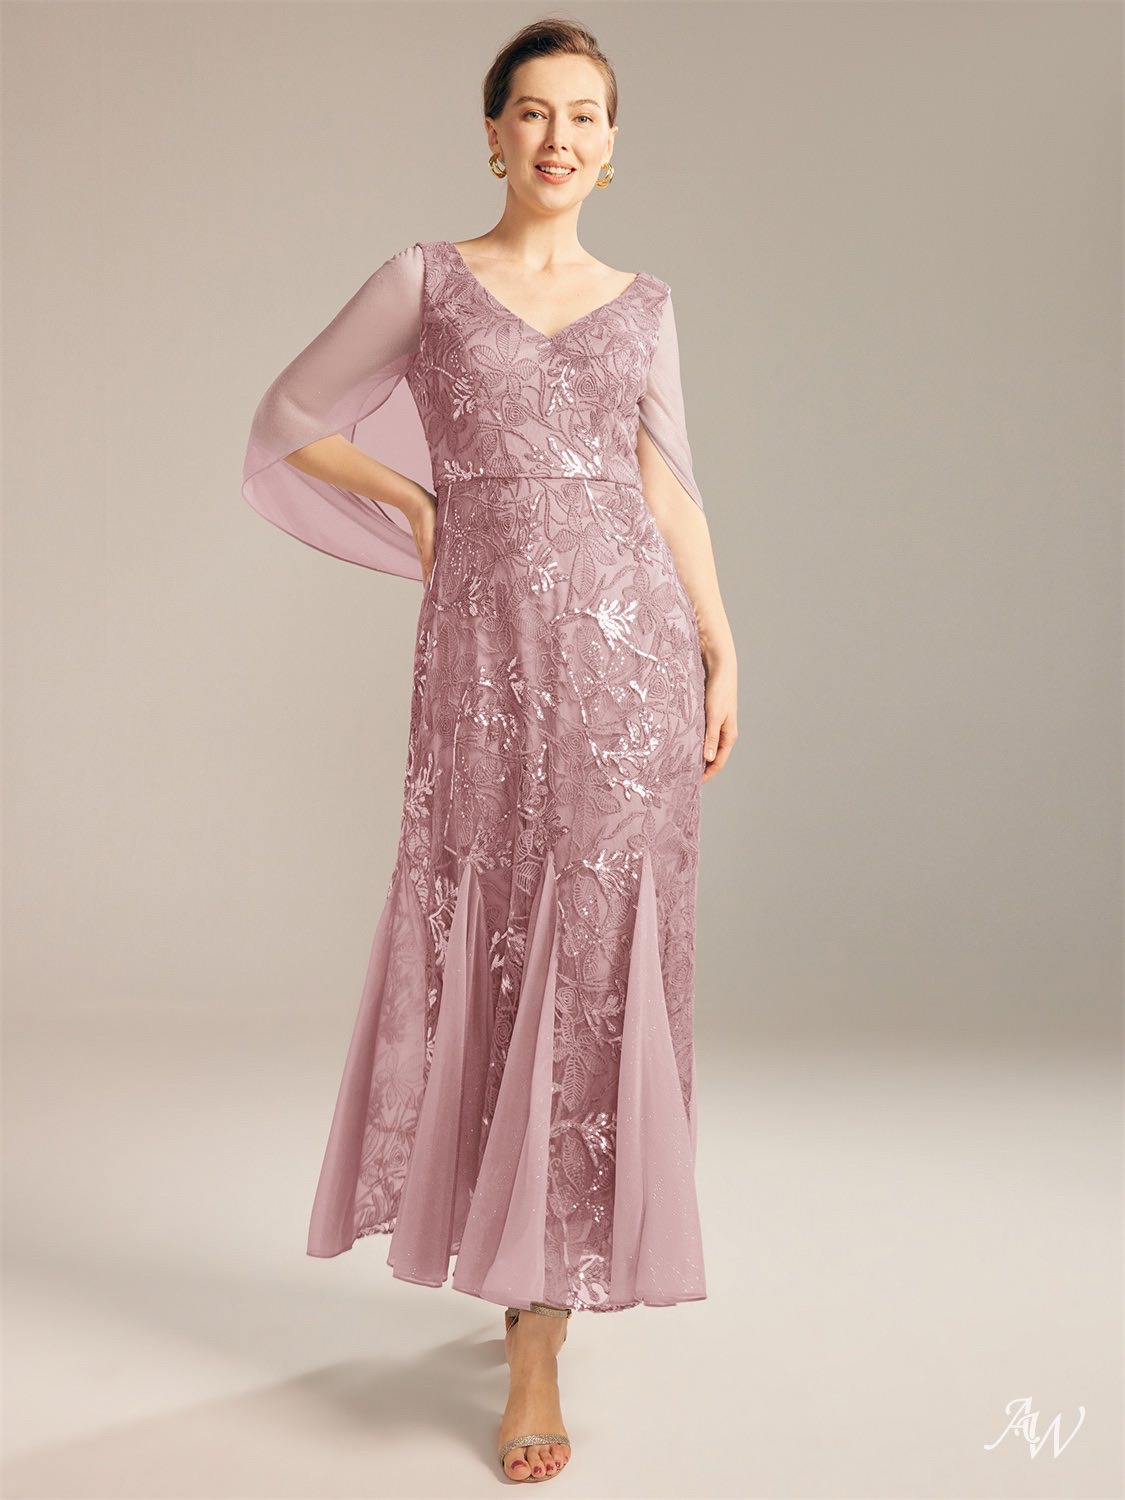 Sparkly Mother of The Bride Dress - AW Bridal 